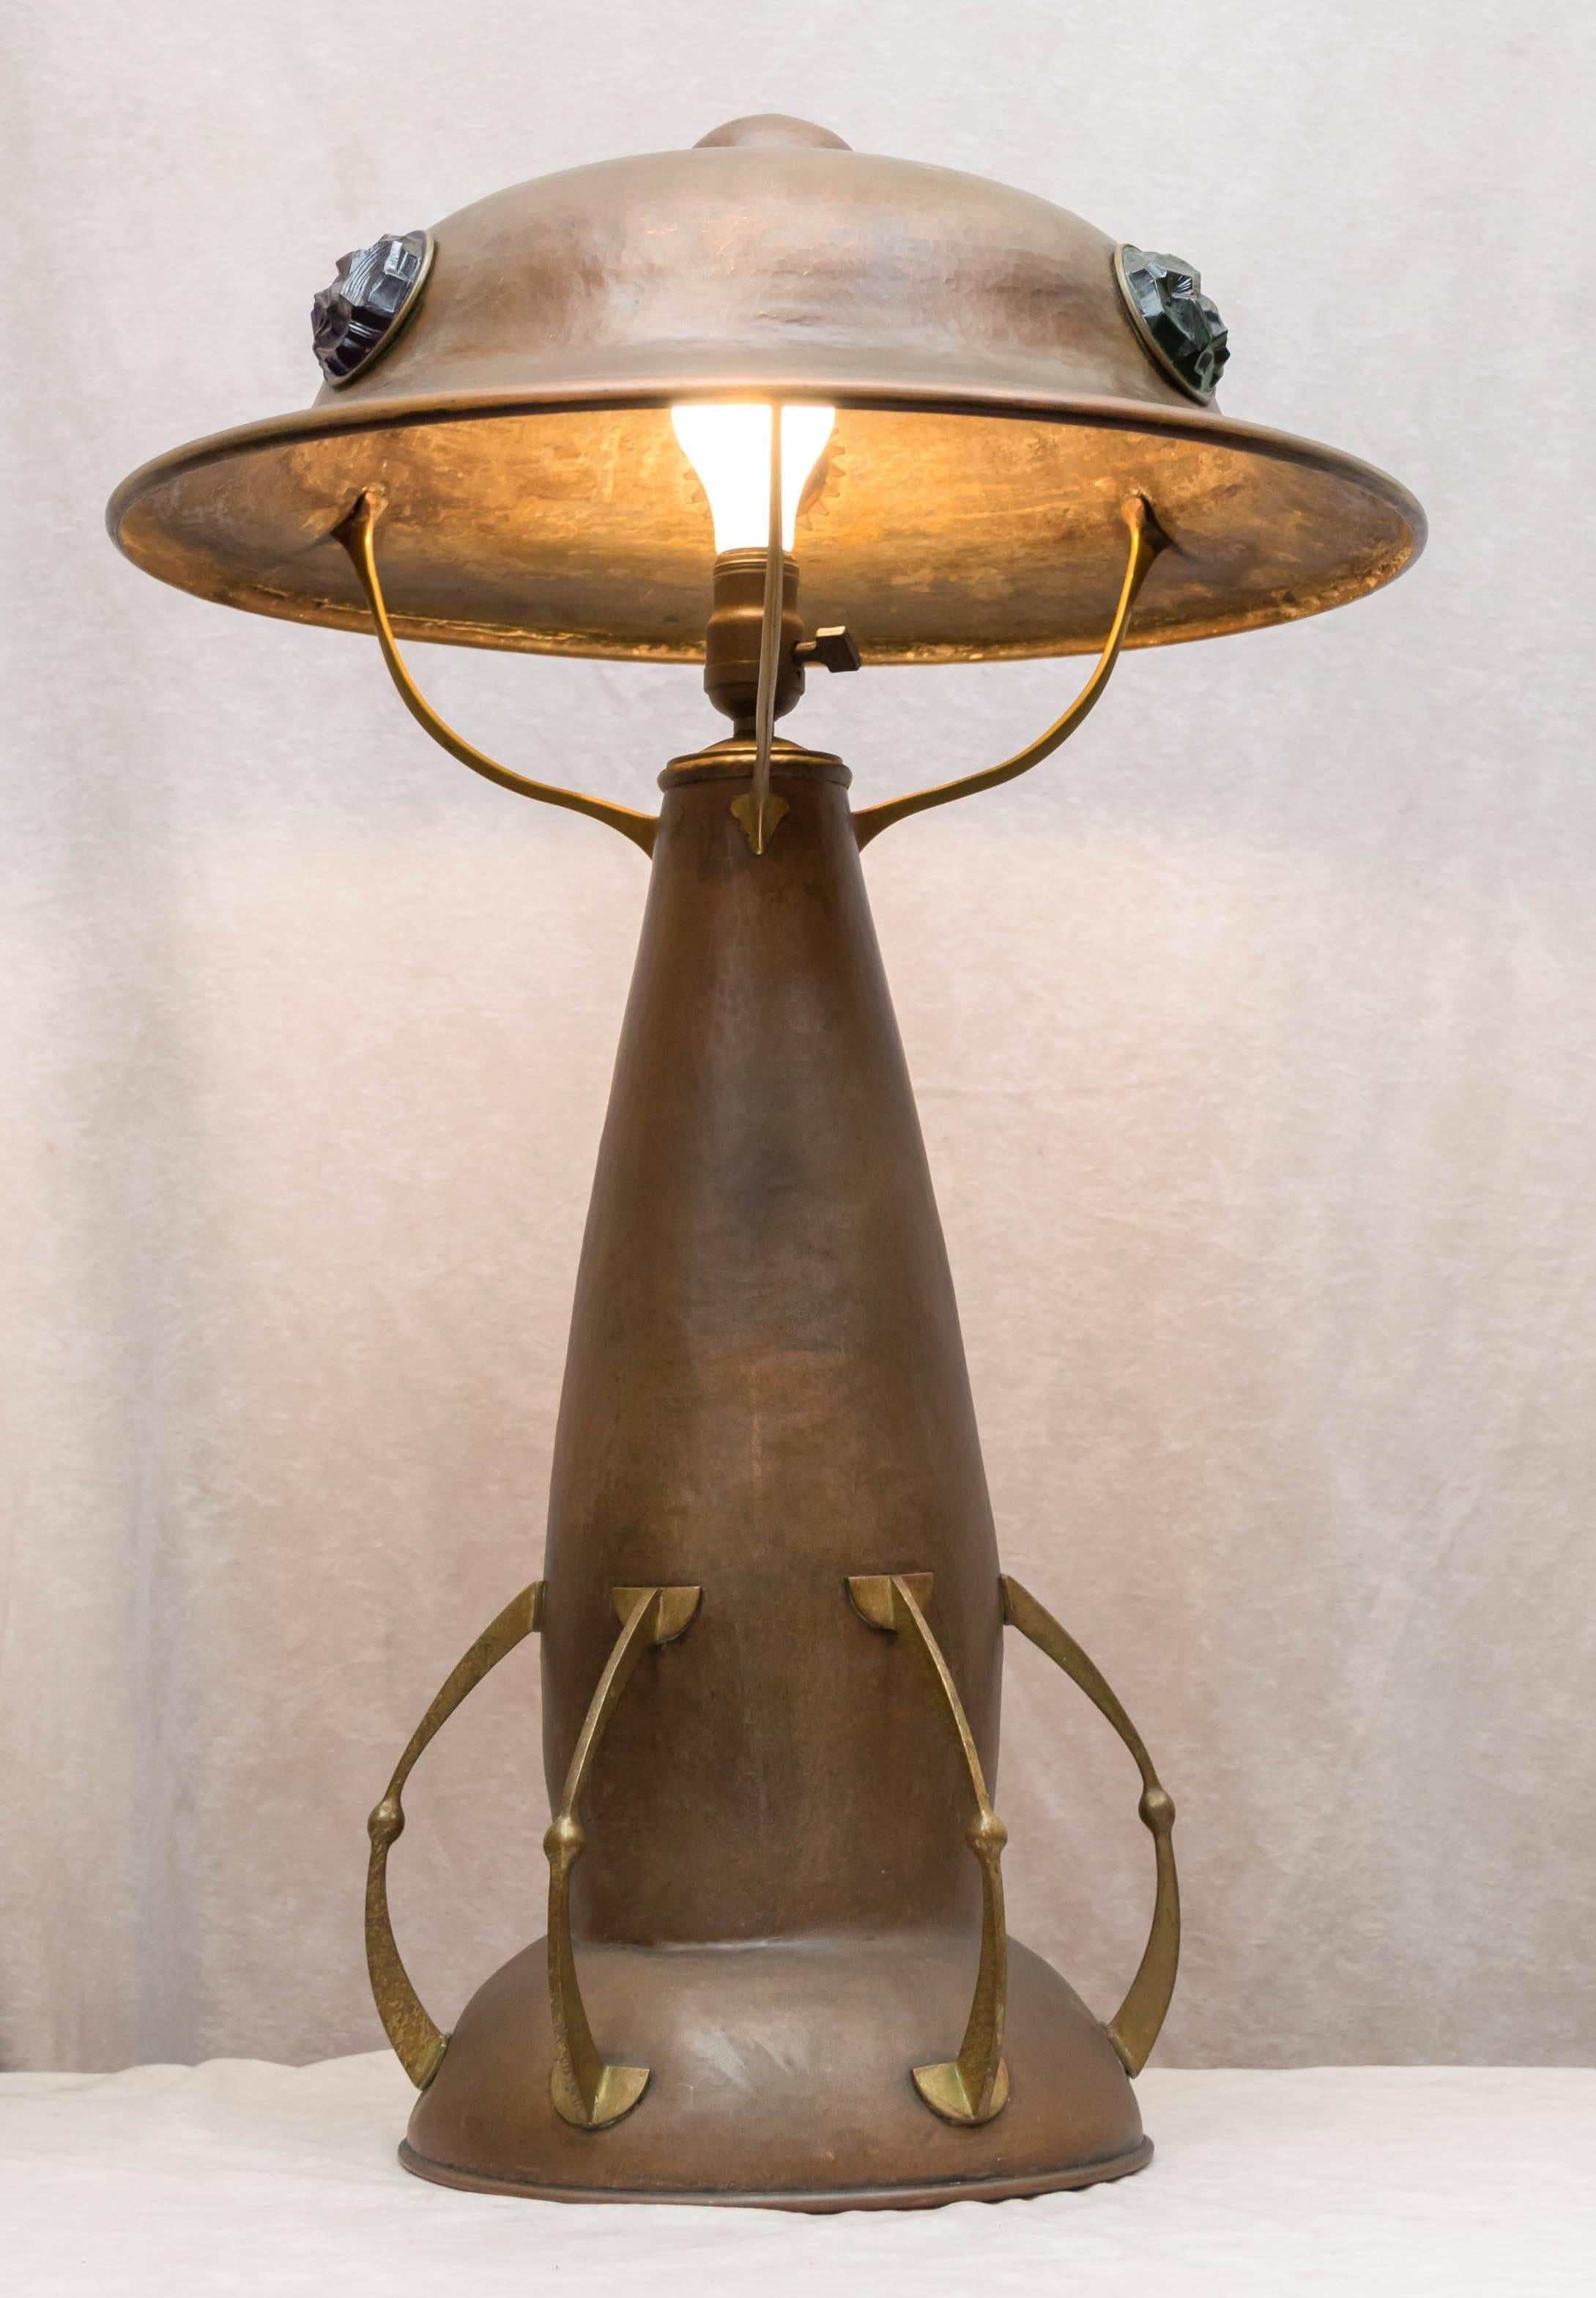 Arts and Crafts Monumental Austrian Arts & Crafts Hammered Copper Table Lamp